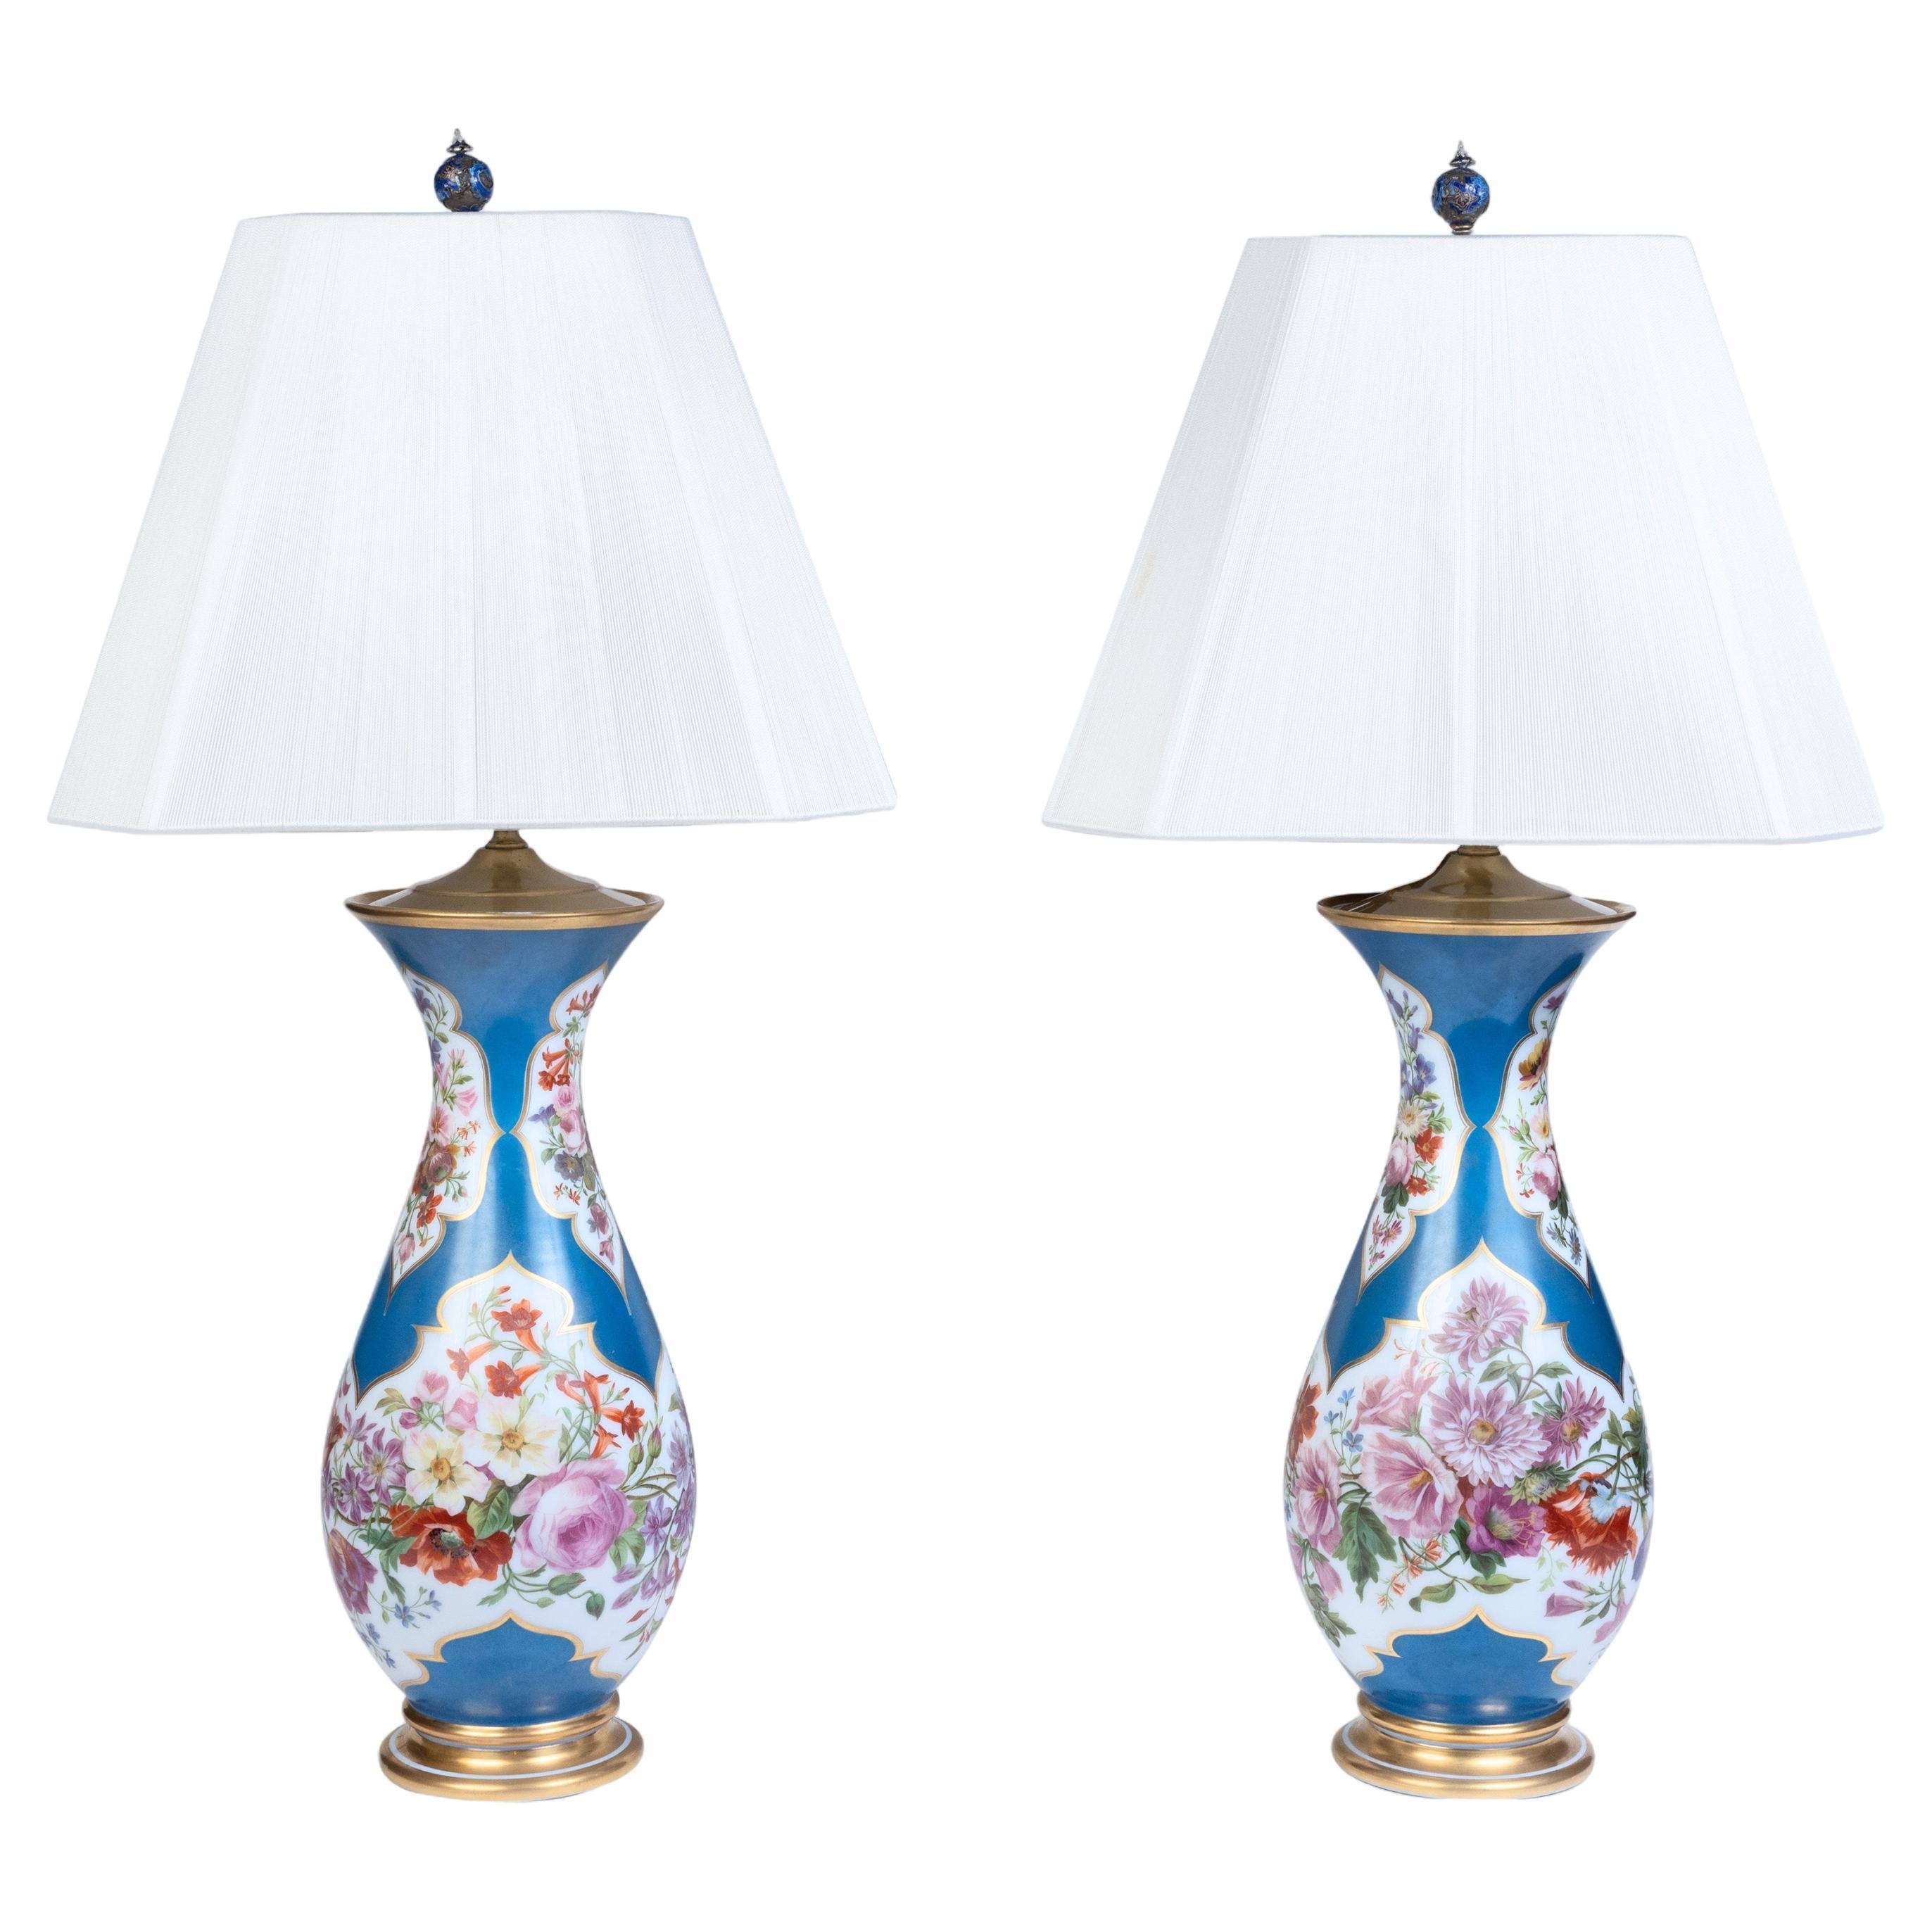 A Large Pair of French Baccarat Opaline Glass Vases / Lamps, 19th Century